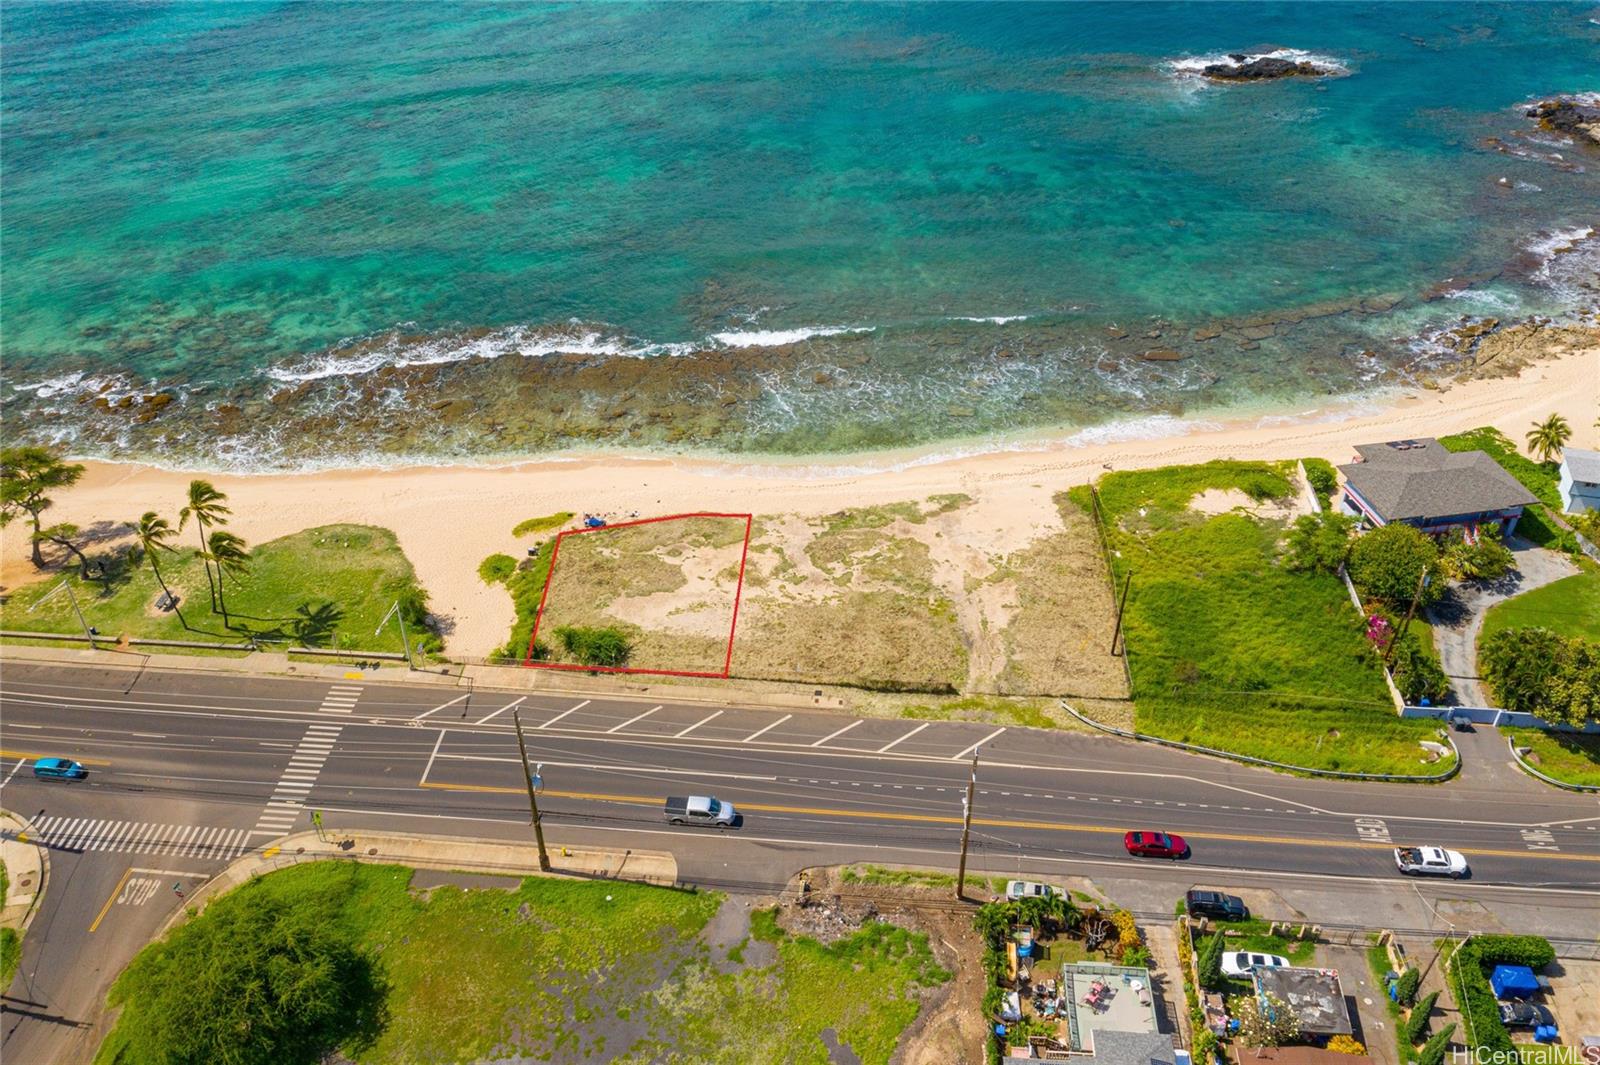 84-1105 Farrington Hwy  Waianae, Hi vacant land for sale - photo 14 of 21